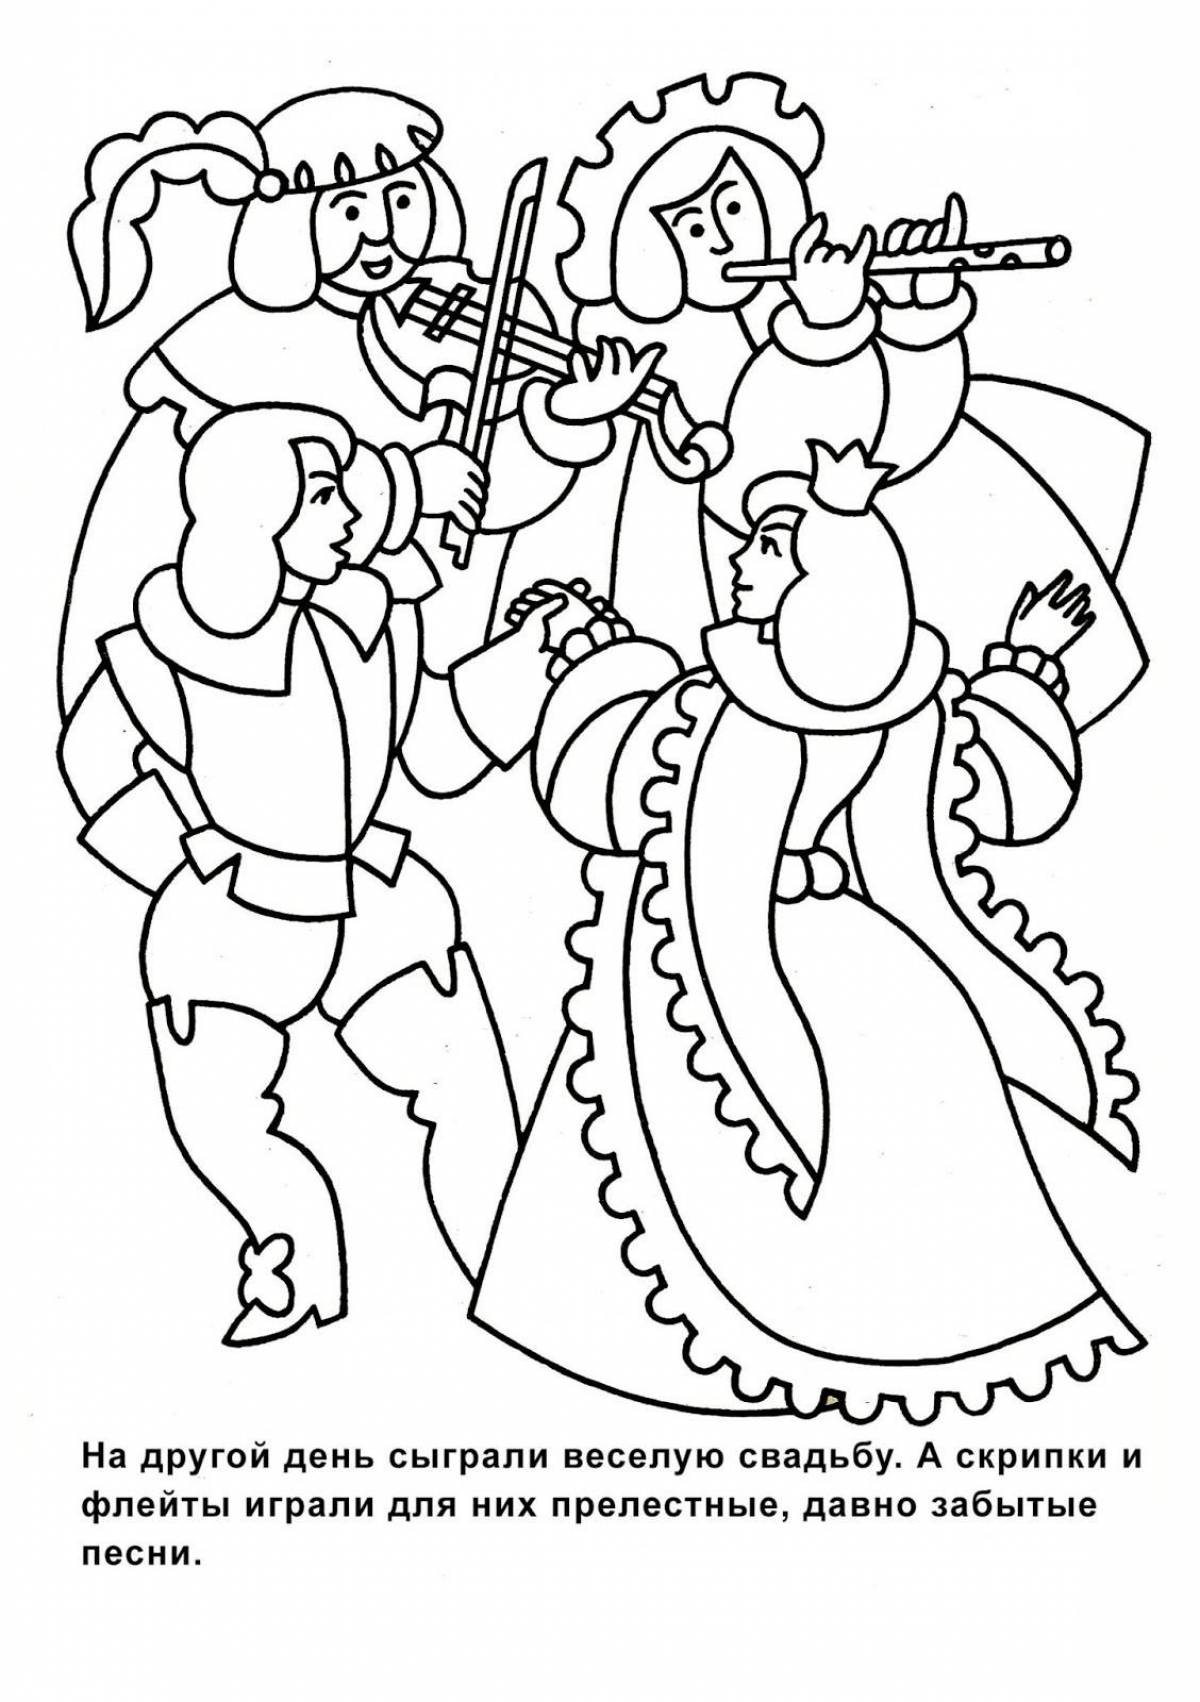 Refreshing Charles Perrault's fairy tale coloring page